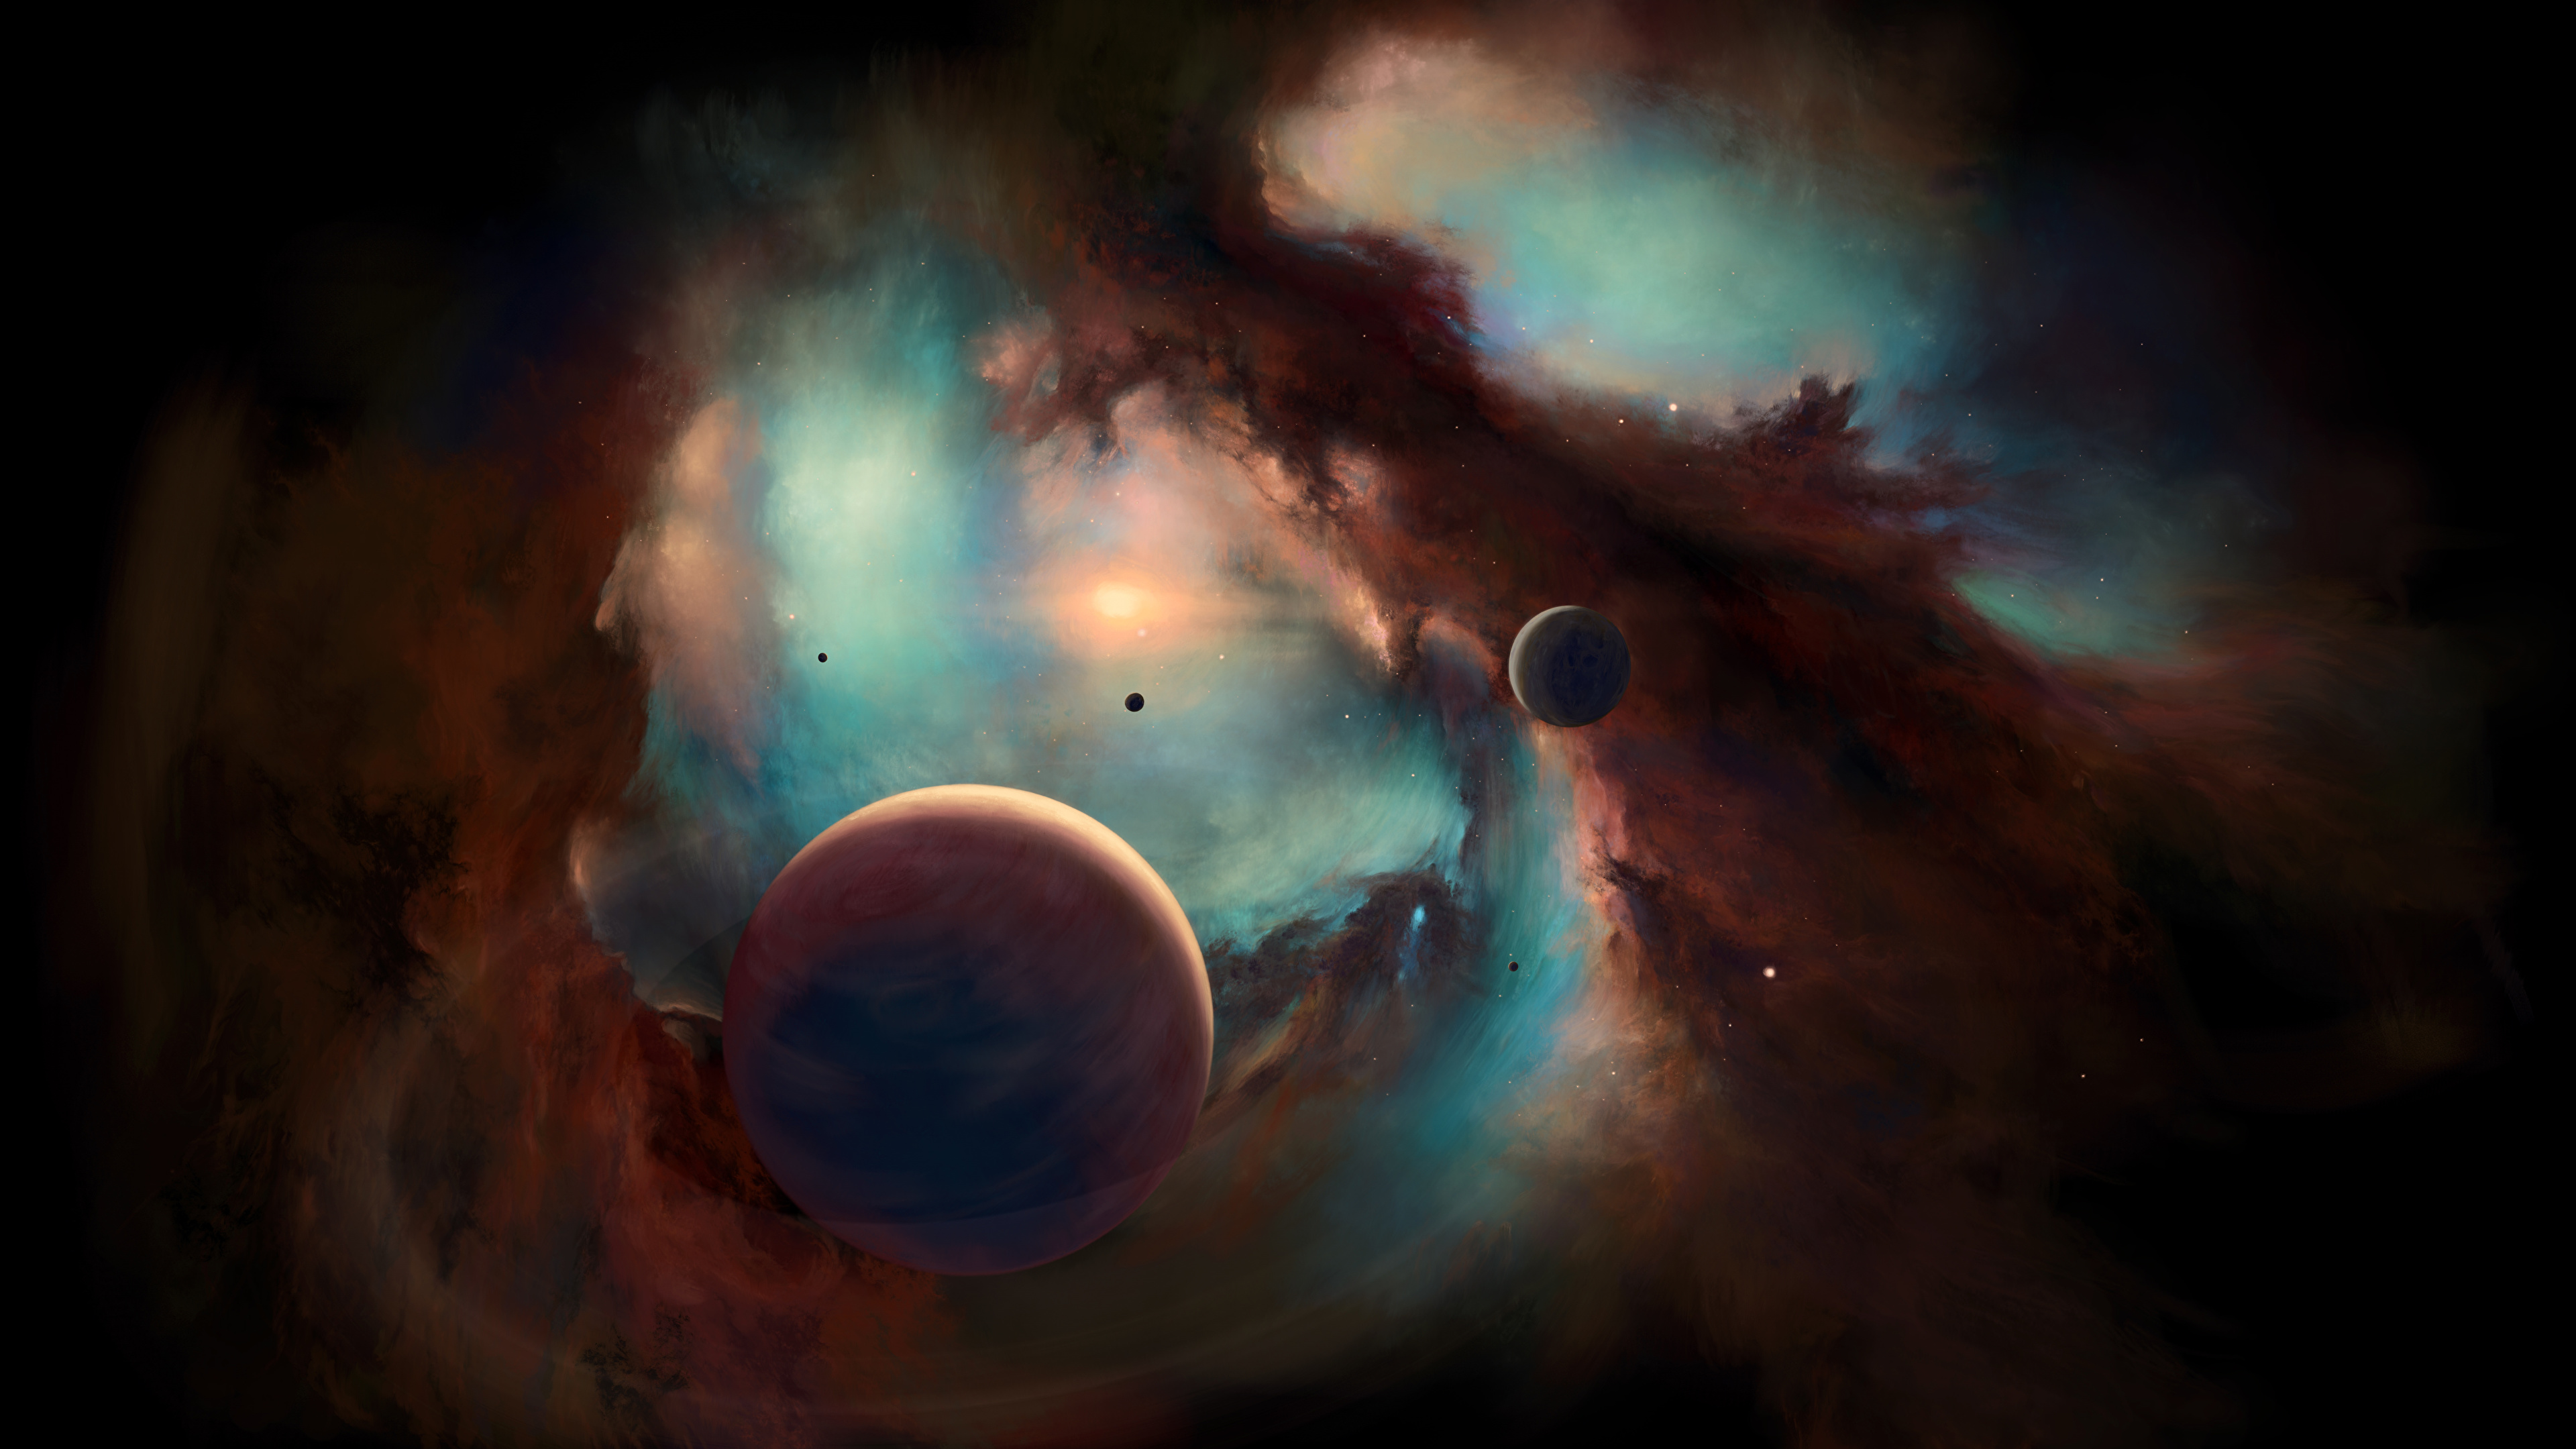 Image nebula Planets Space 3840x2160 planet Nebulae in space